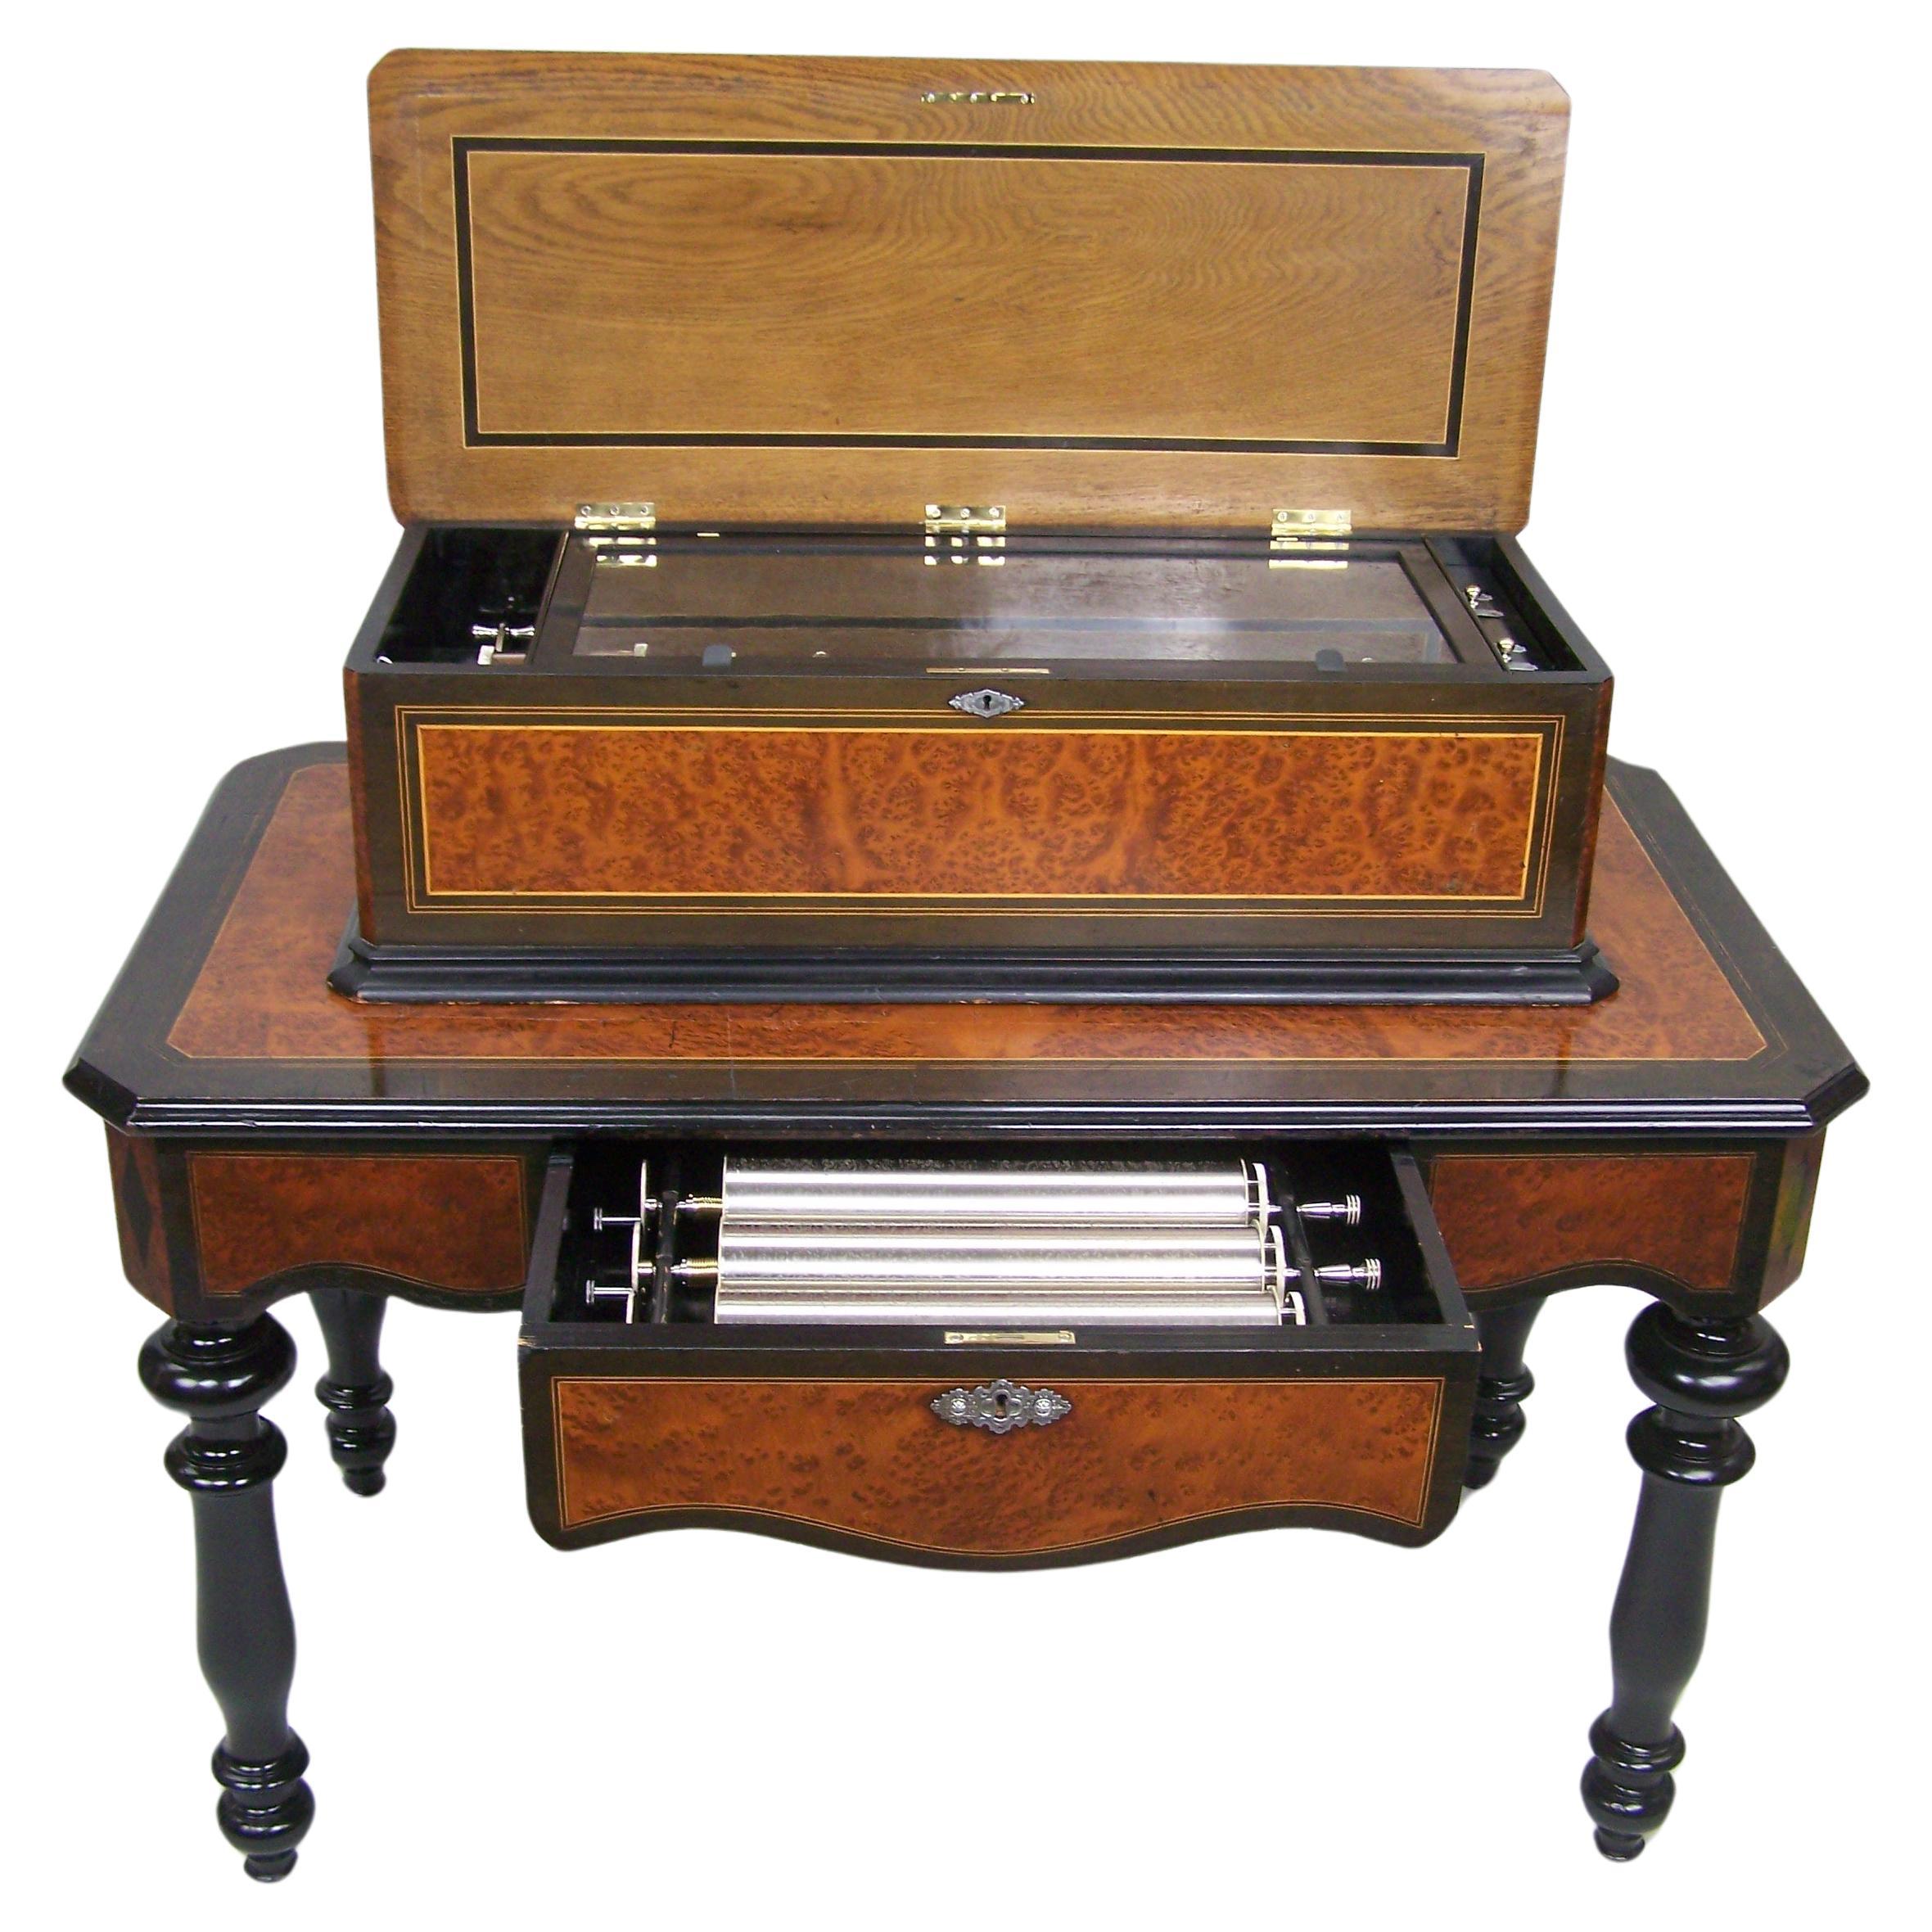 Music box on table with 4 interchangeble cylinders